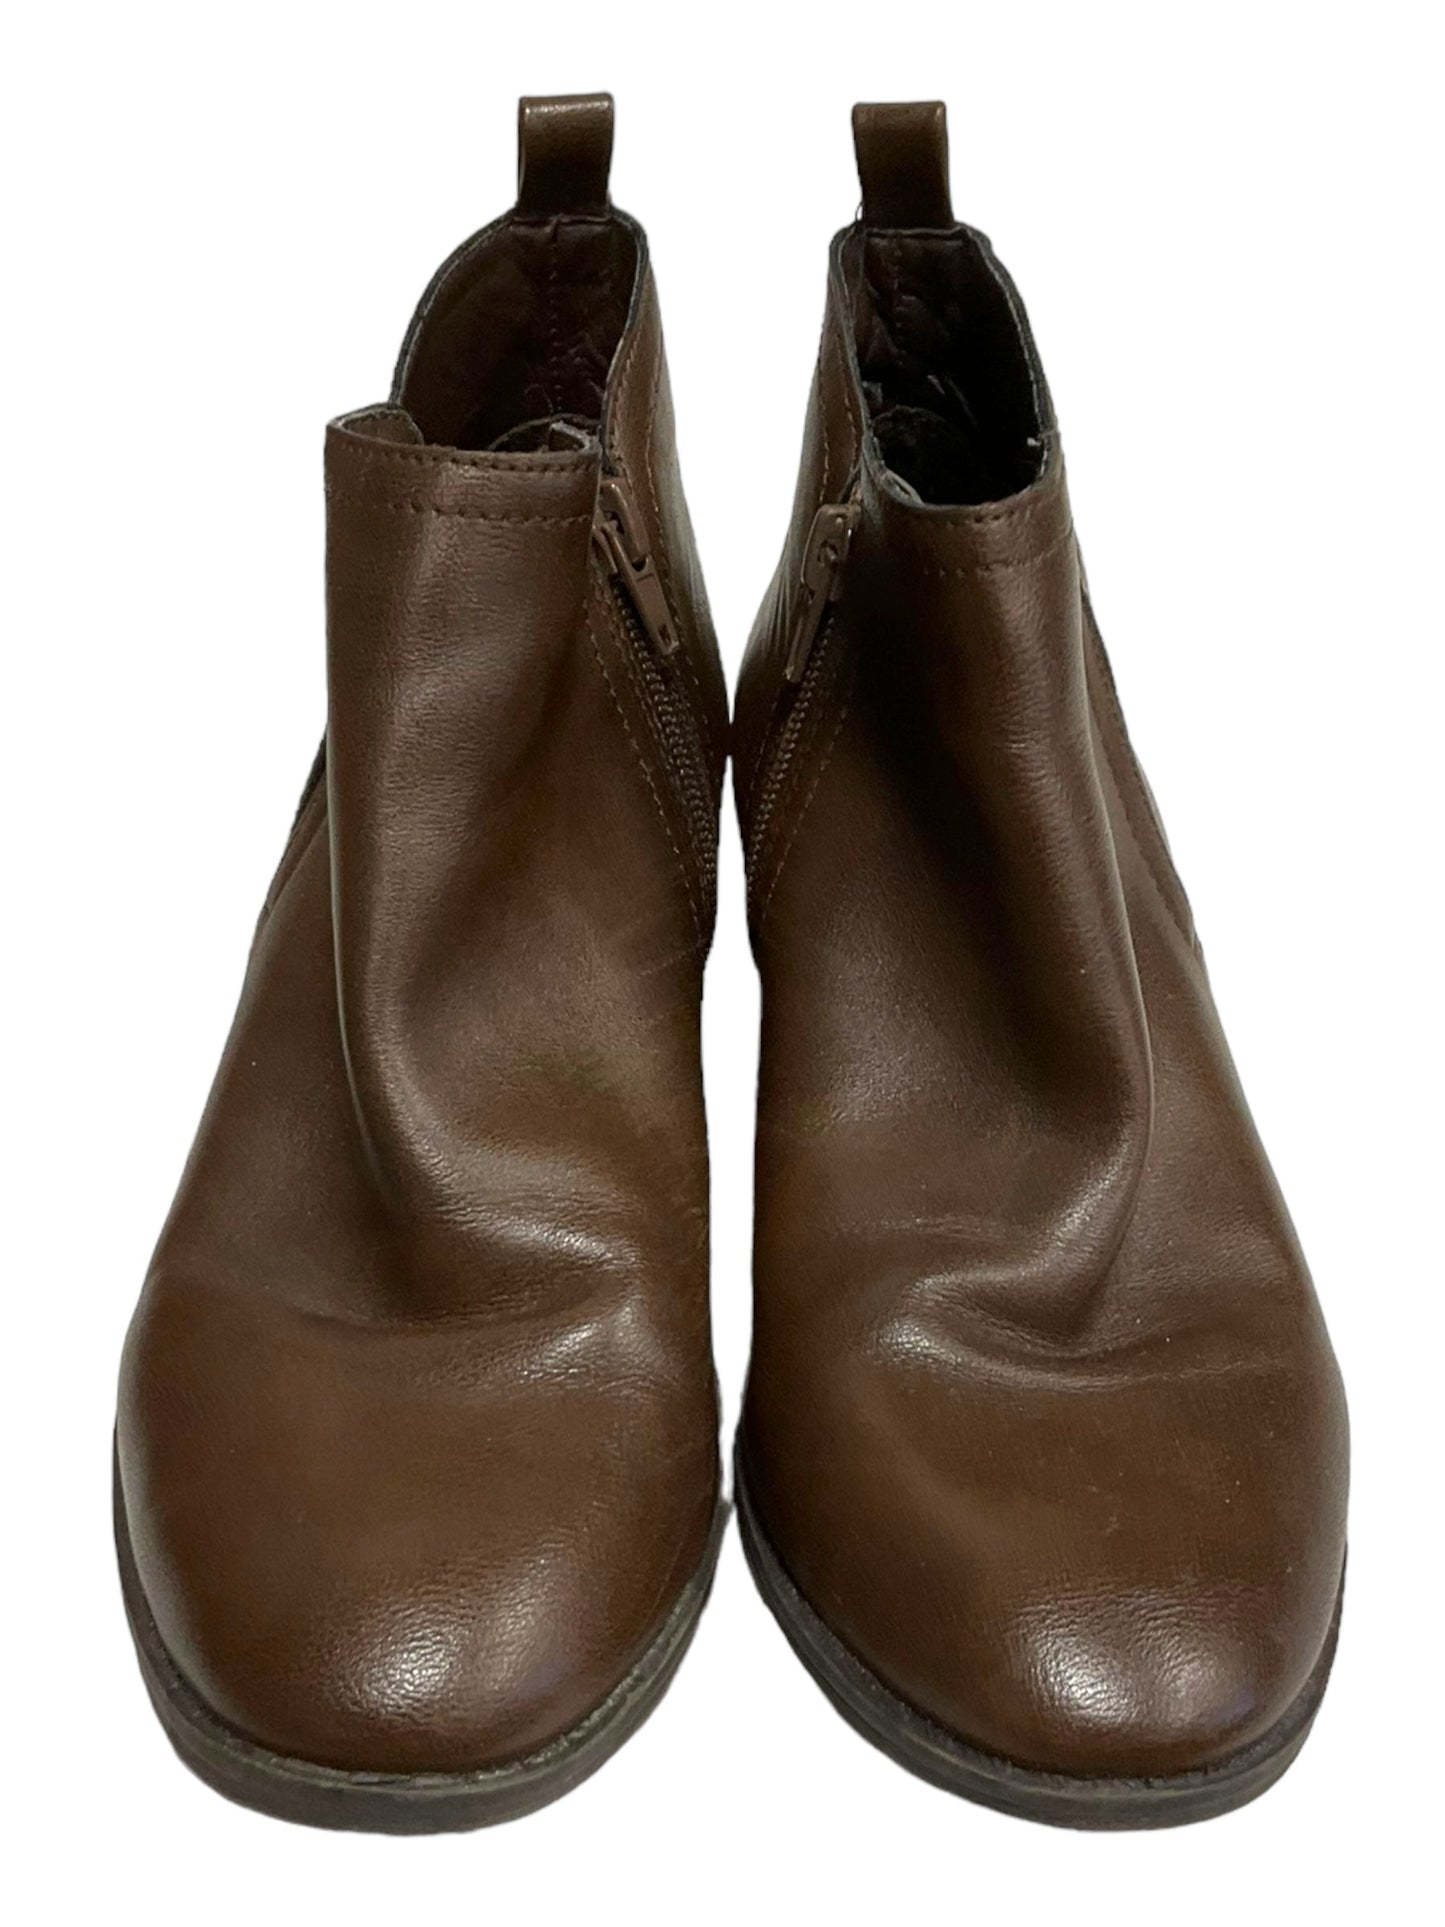 Brown Boots Ankle Heels Massini, Size 6.5